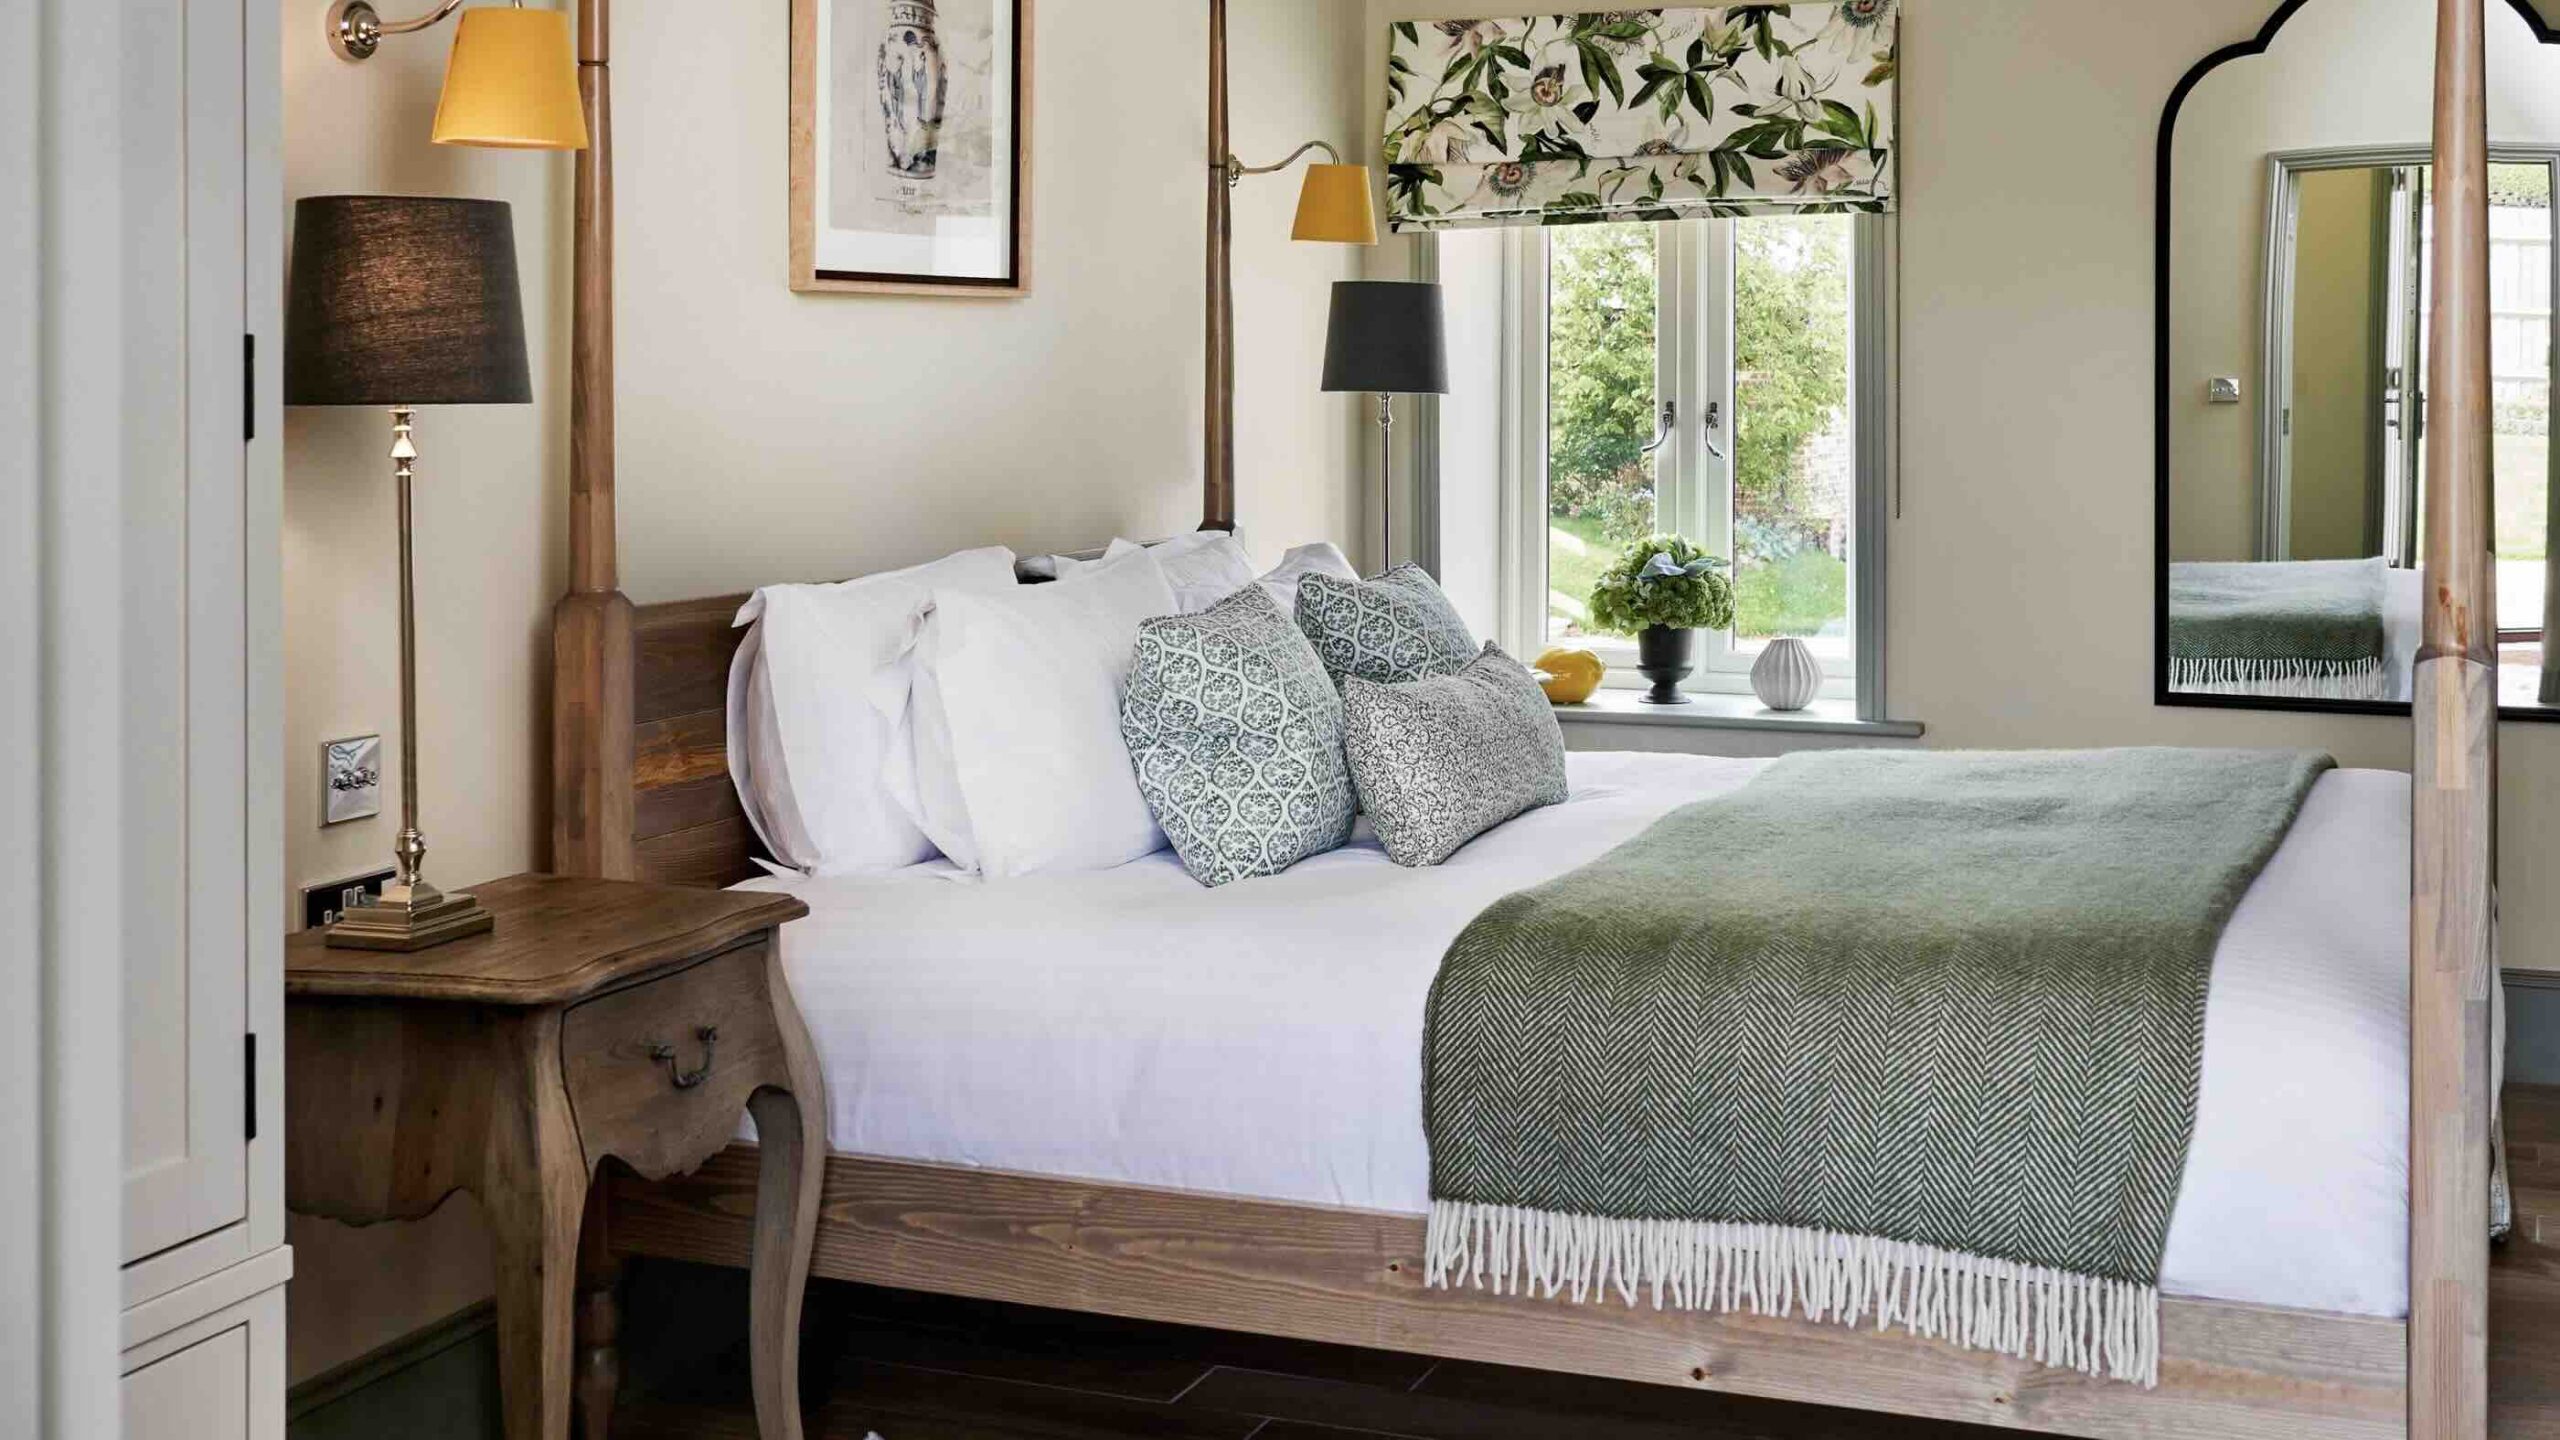 The Montagu Arms Hotel bedroom at one of the best luxury hotels in the New Forest